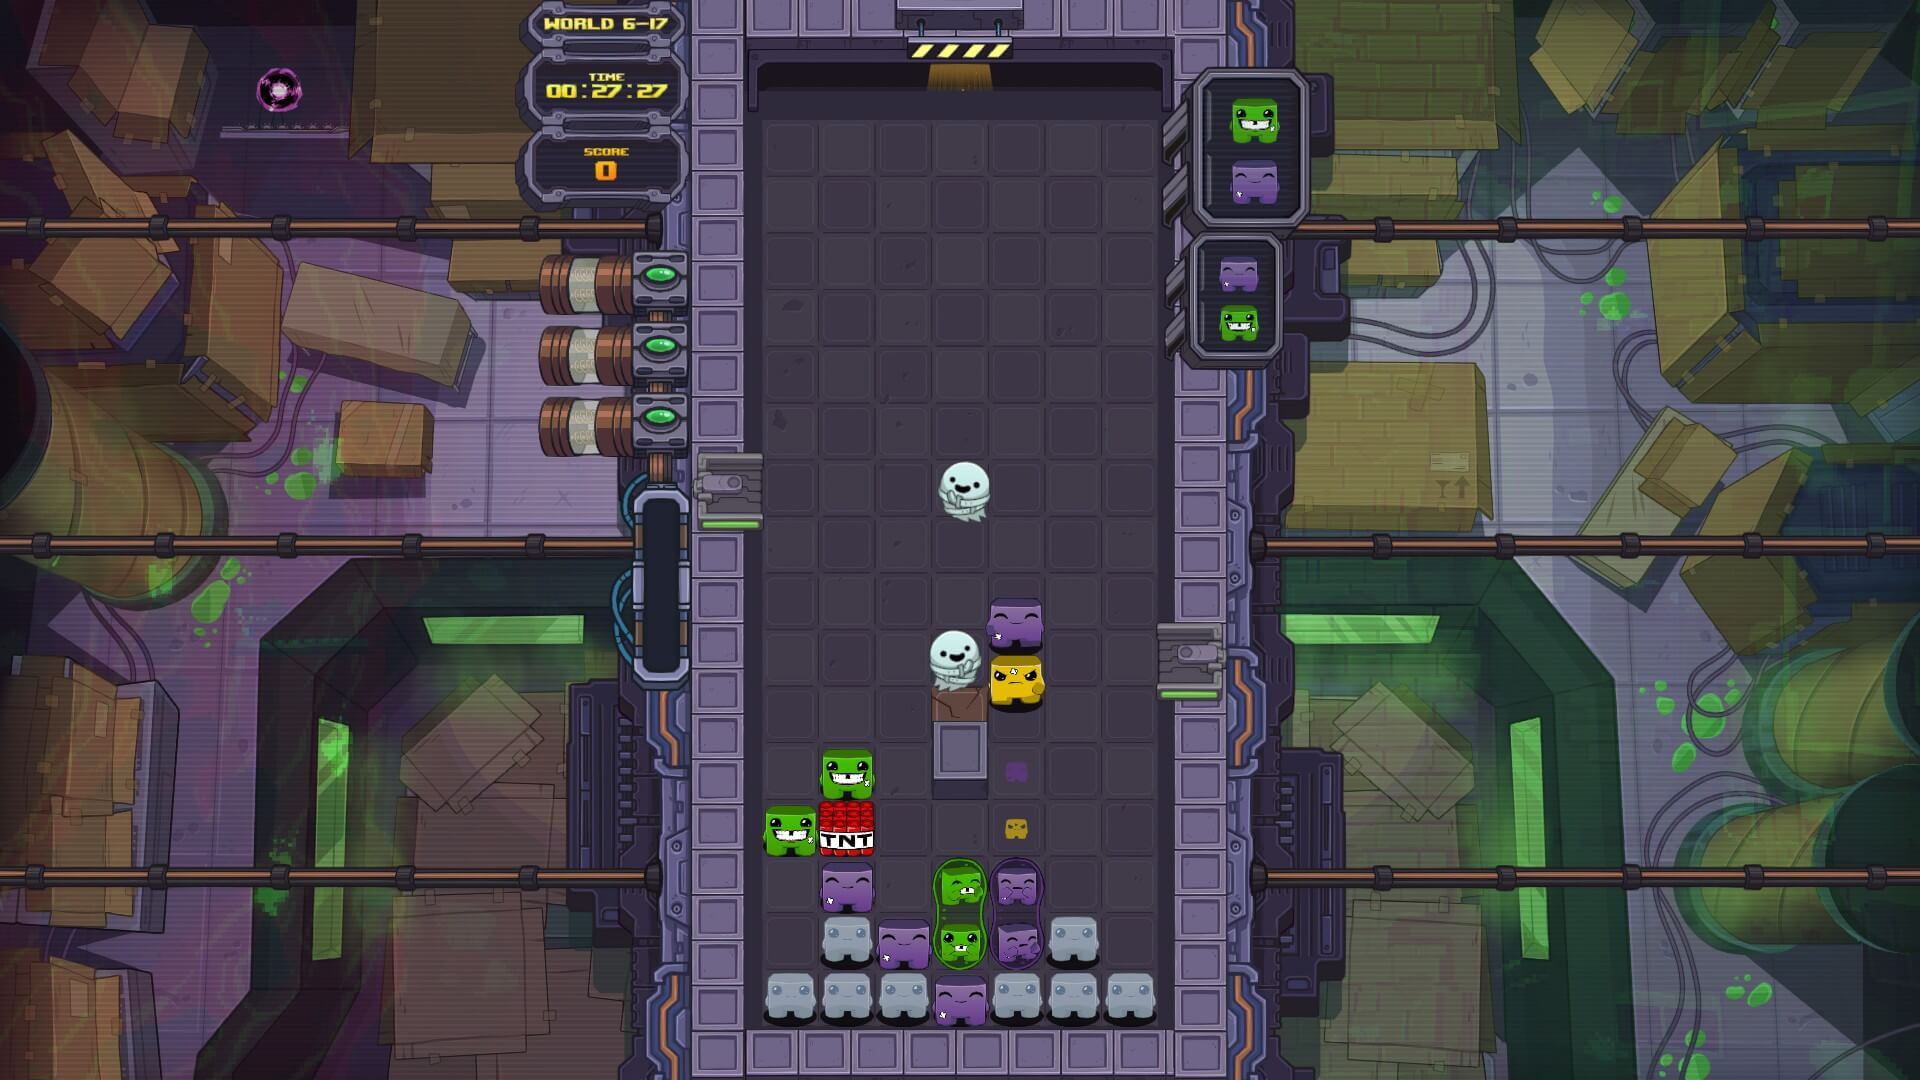 One of the levels later in the game. Several ghosts are bouncing around while a block of dynamite is stacked with two greens.